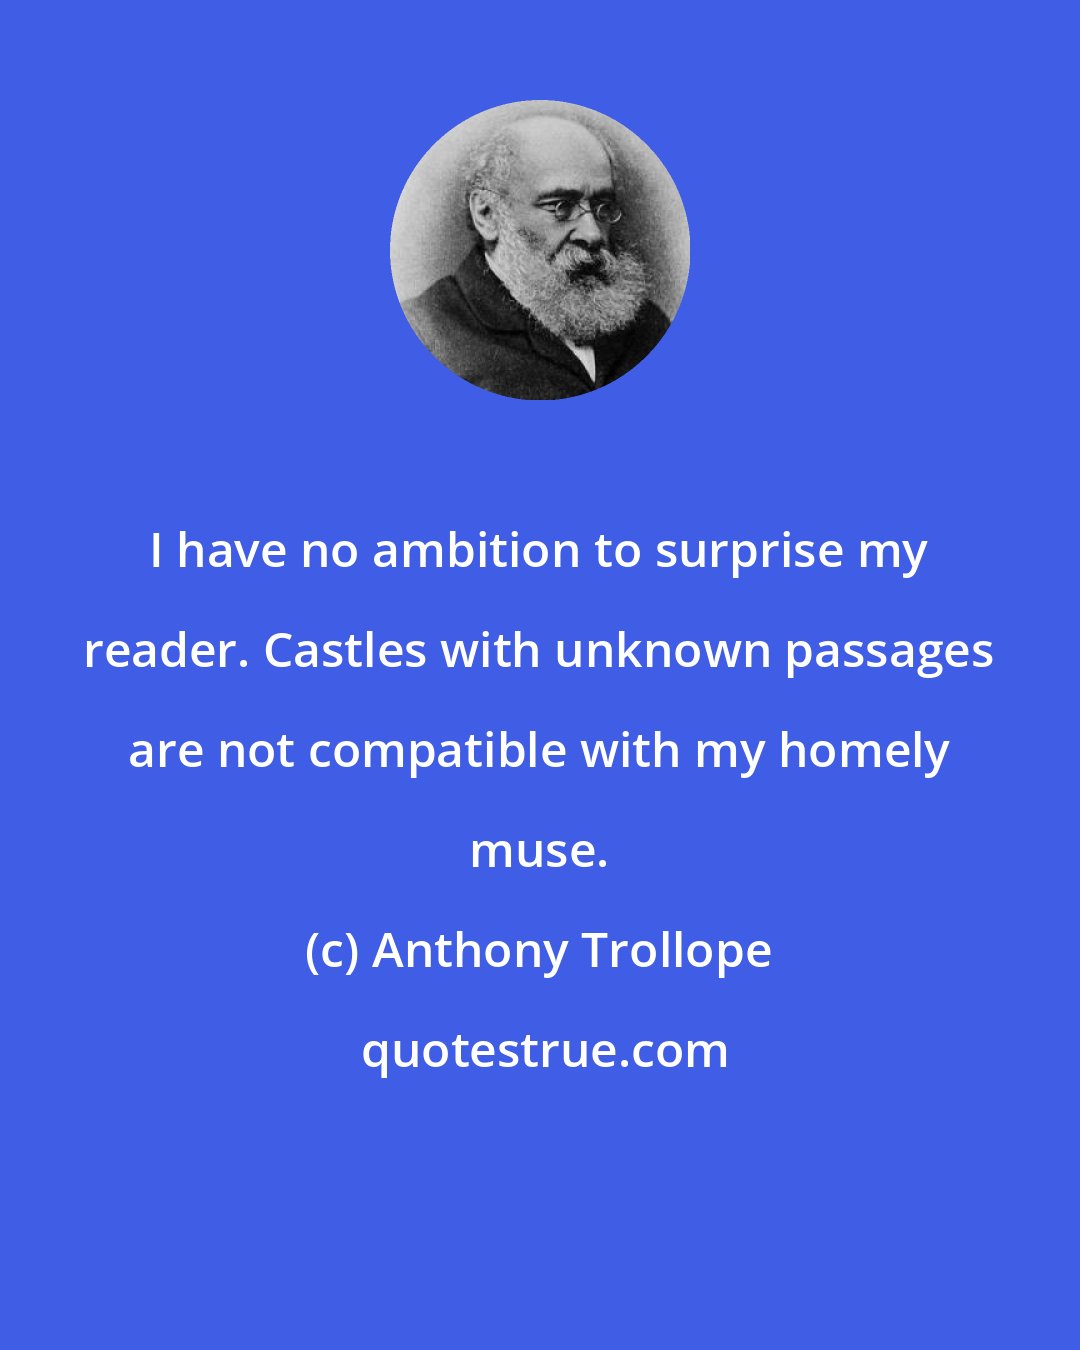 Anthony Trollope: I have no ambition to surprise my reader. Castles with unknown passages are not compatible with my homely muse.